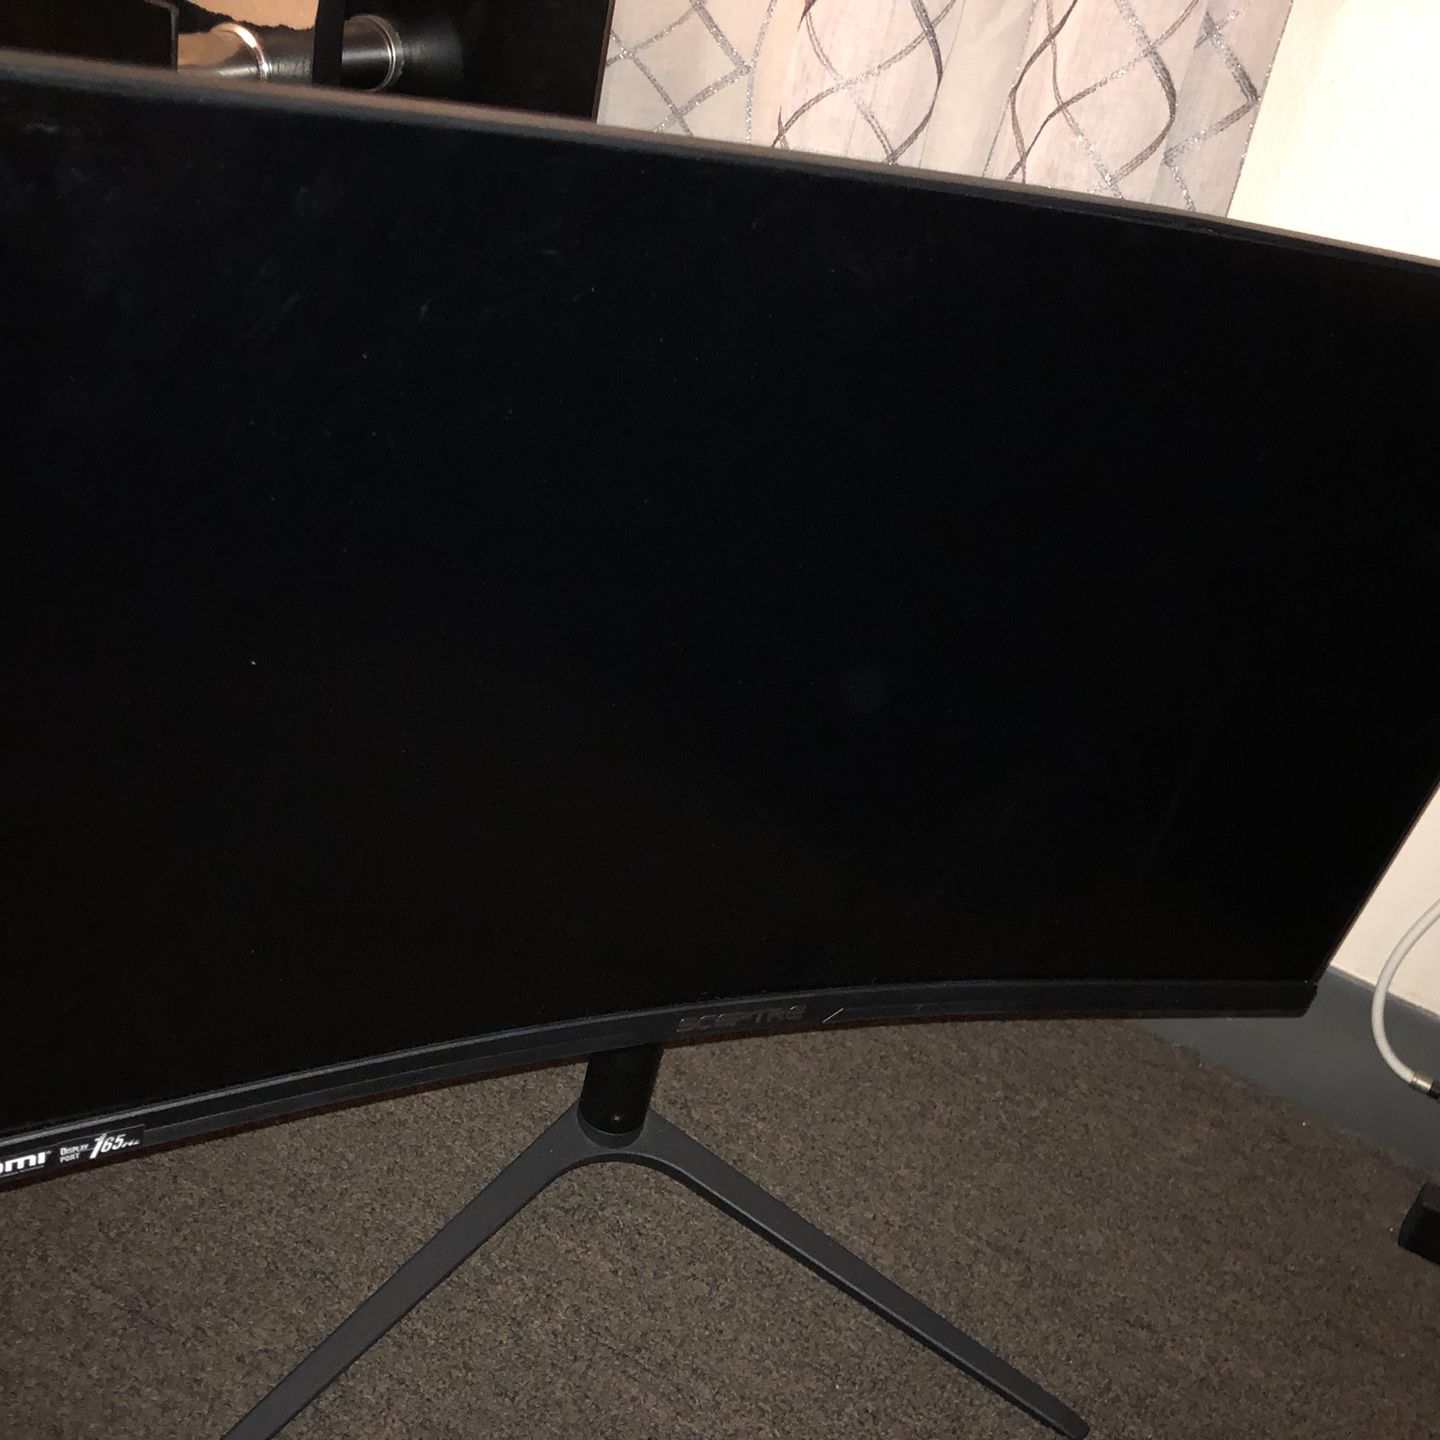 27” Sceptre Quad Had Curved Gaming Monitor 